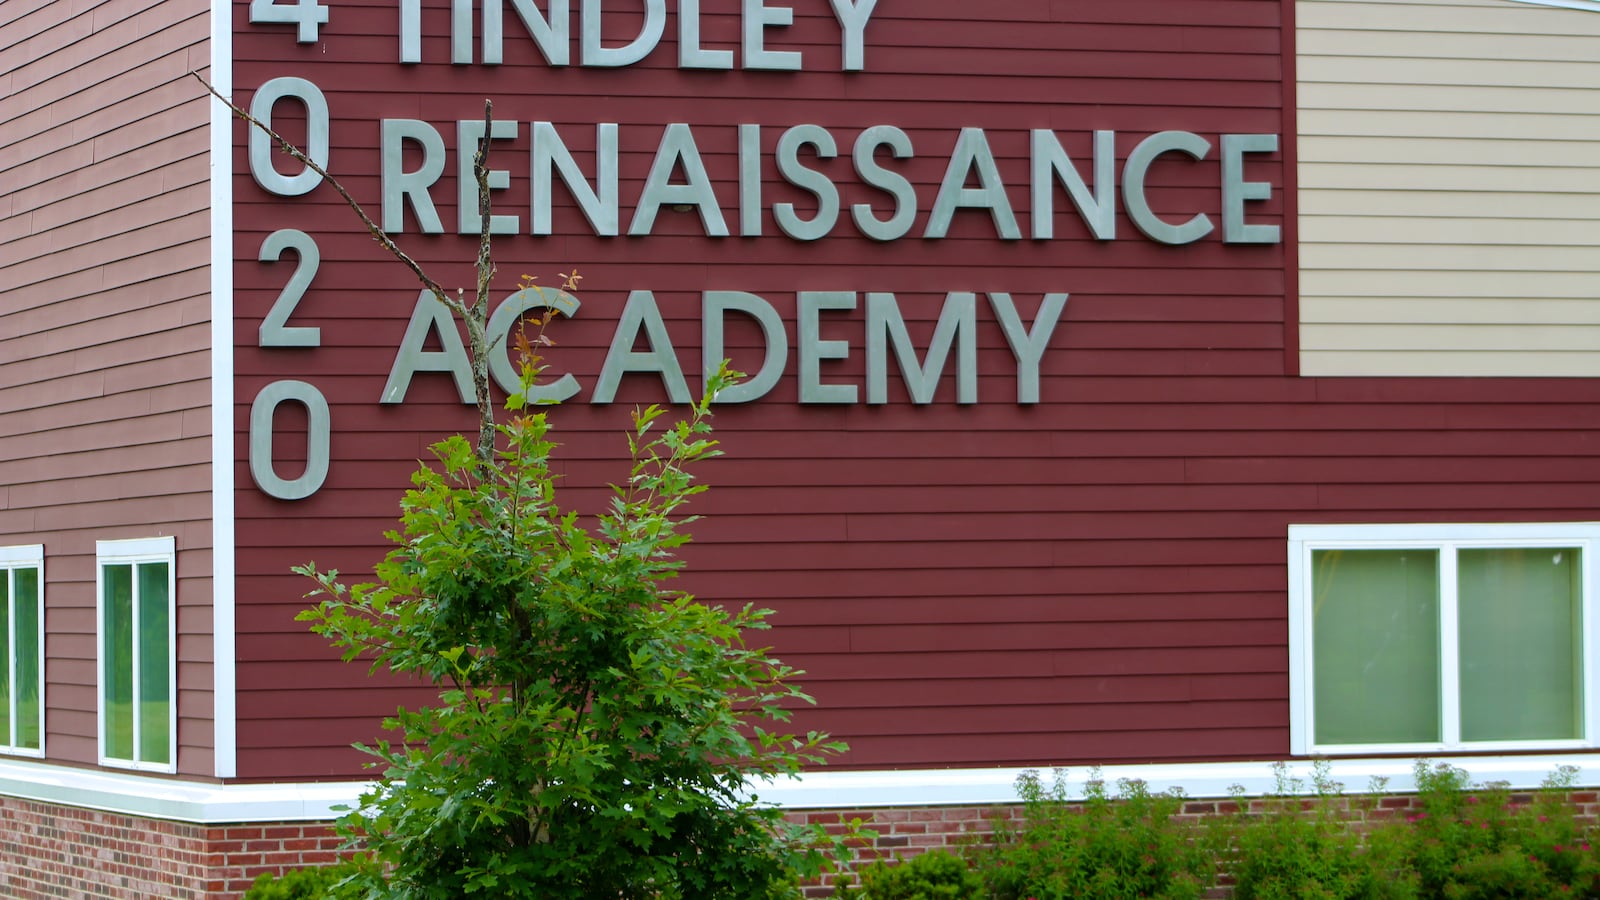 Tindley Renaissance Academy, one of three elementary schools in the Tindley Accelerated Schools Network, sits on the east side of Indianapolis.